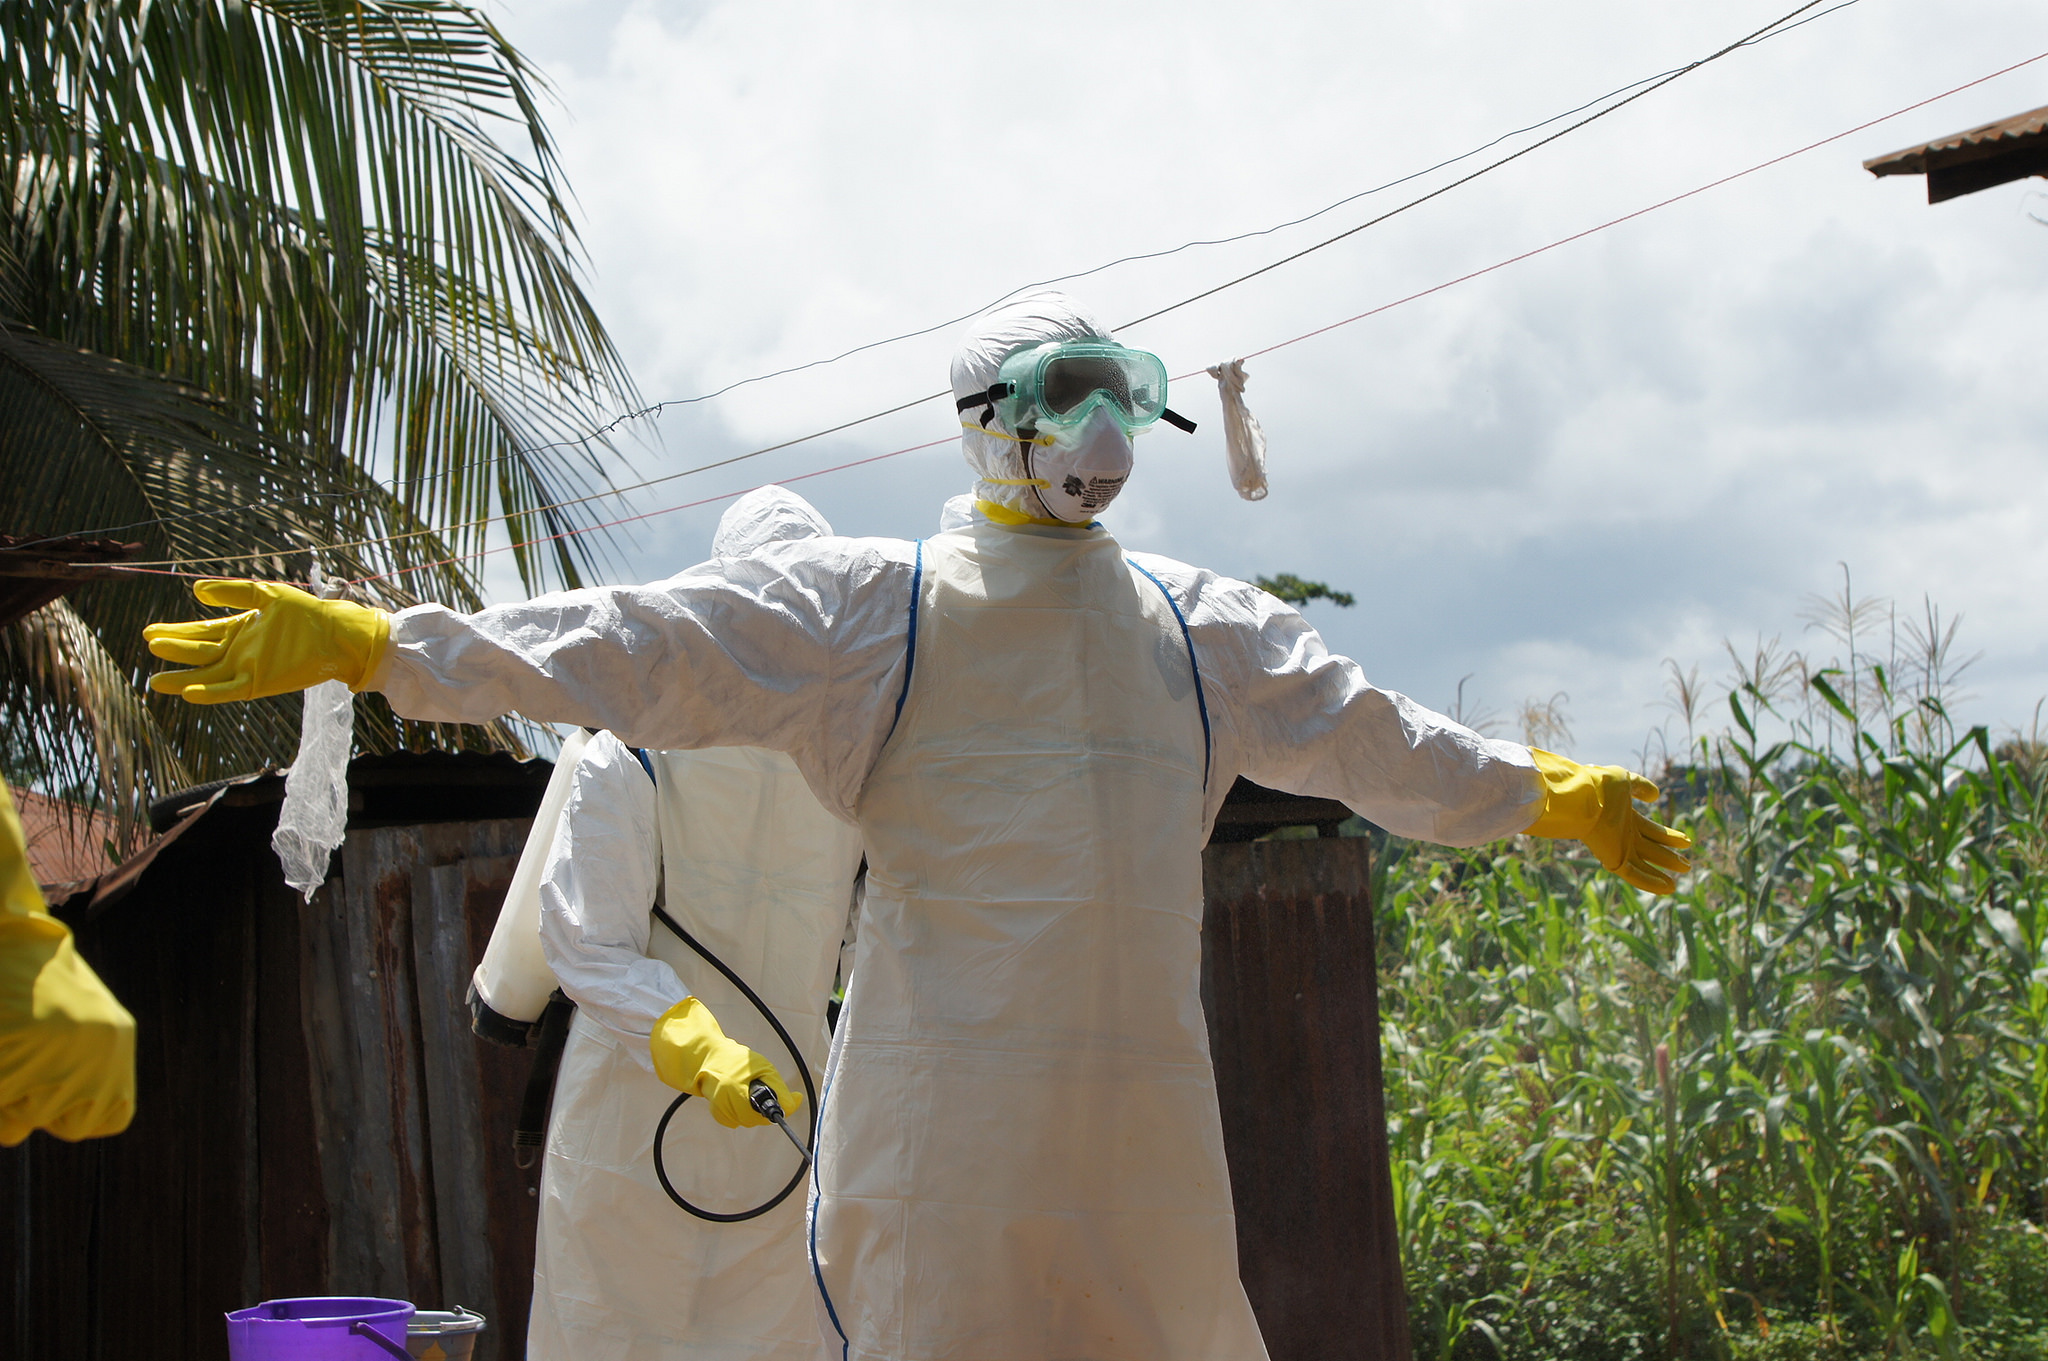 Ebola What To Know, Stay Safe